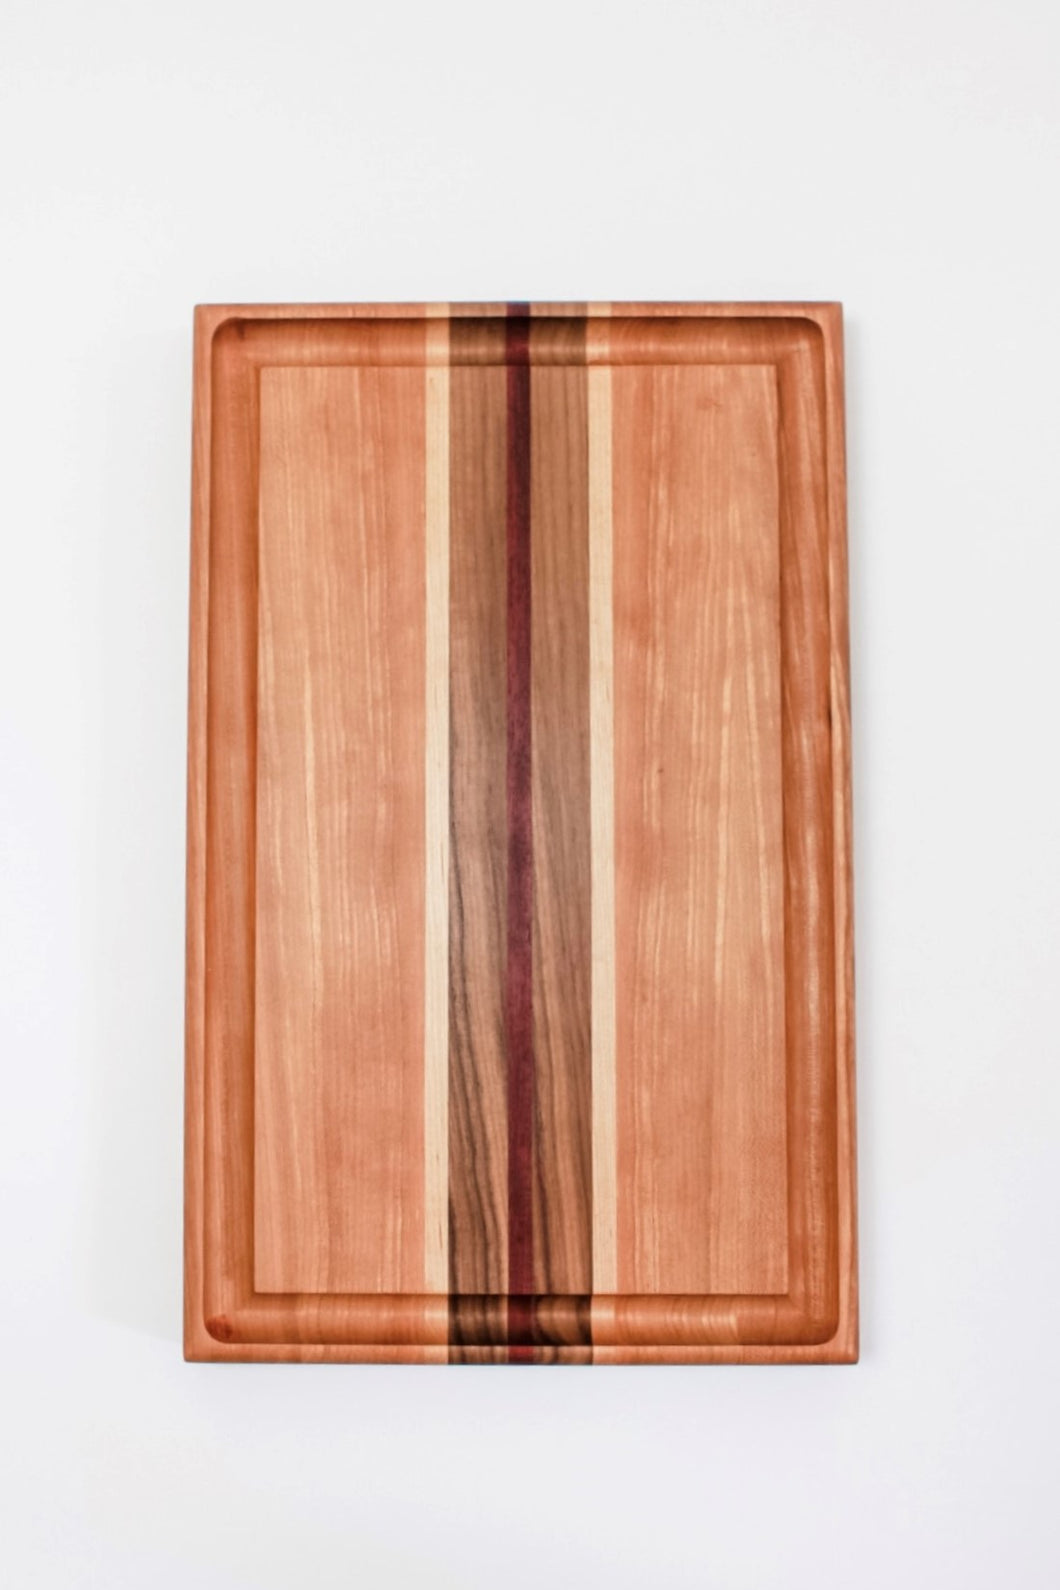 Cutting board made with cherry wood and strips of purpleheart, walnut and maple wood. This board features a juice groove.